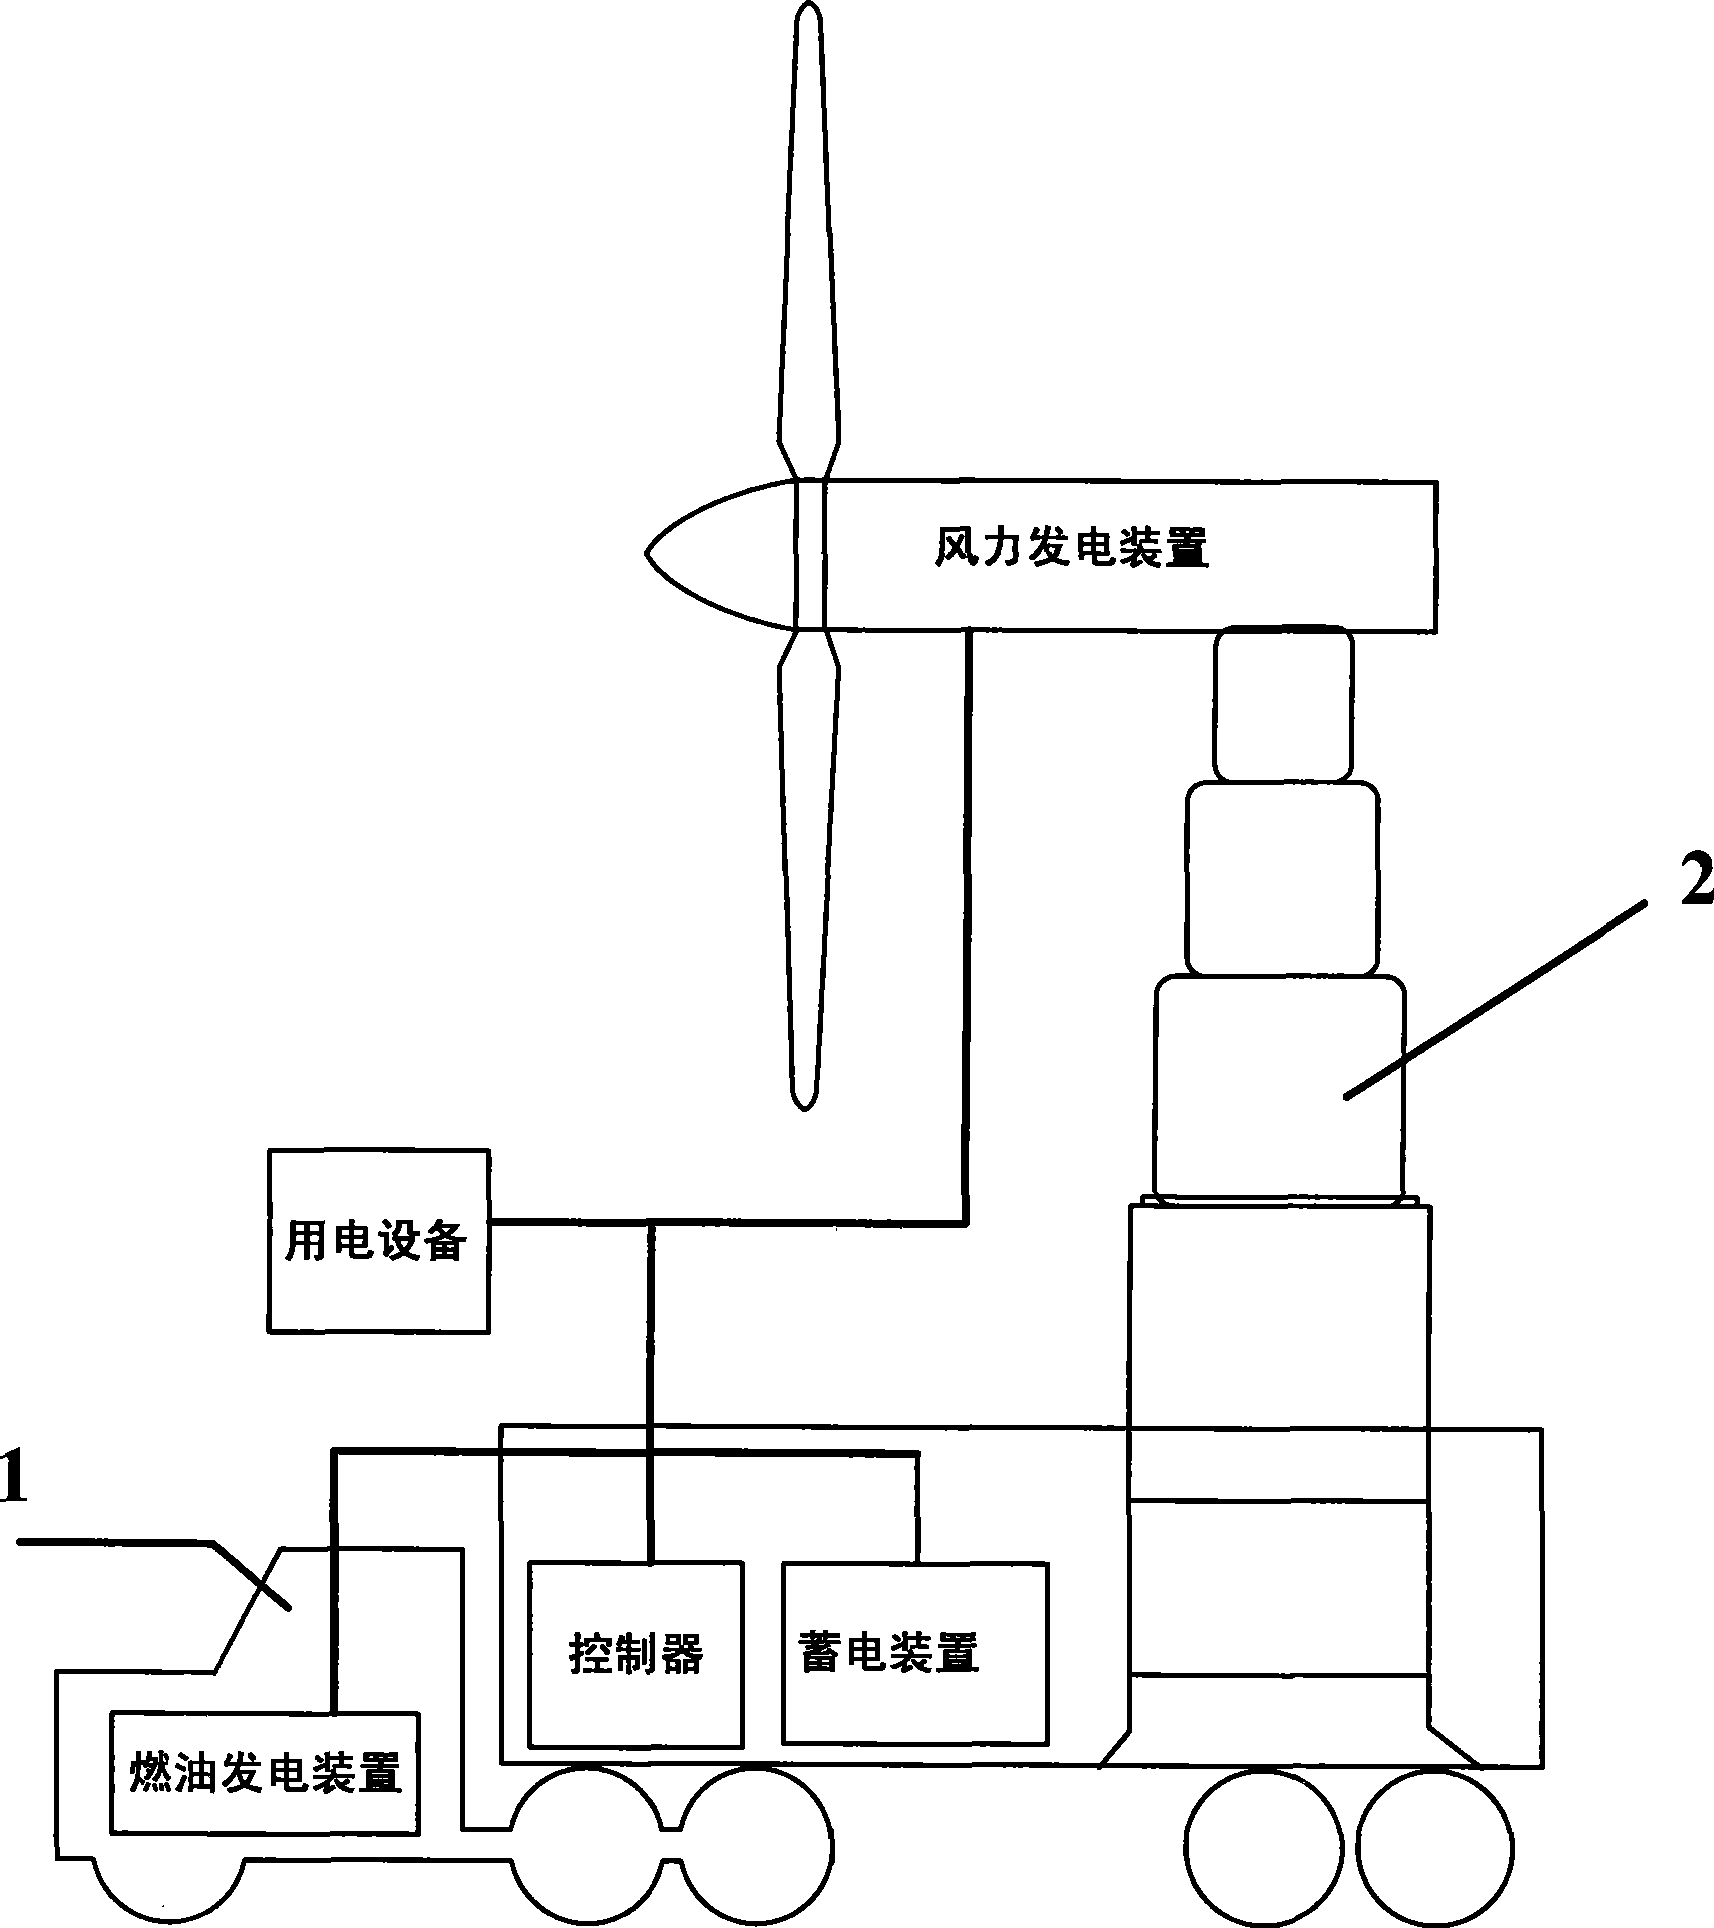 Vehicle power generation system based on wind energy and fuel hybrid power and control method thereof